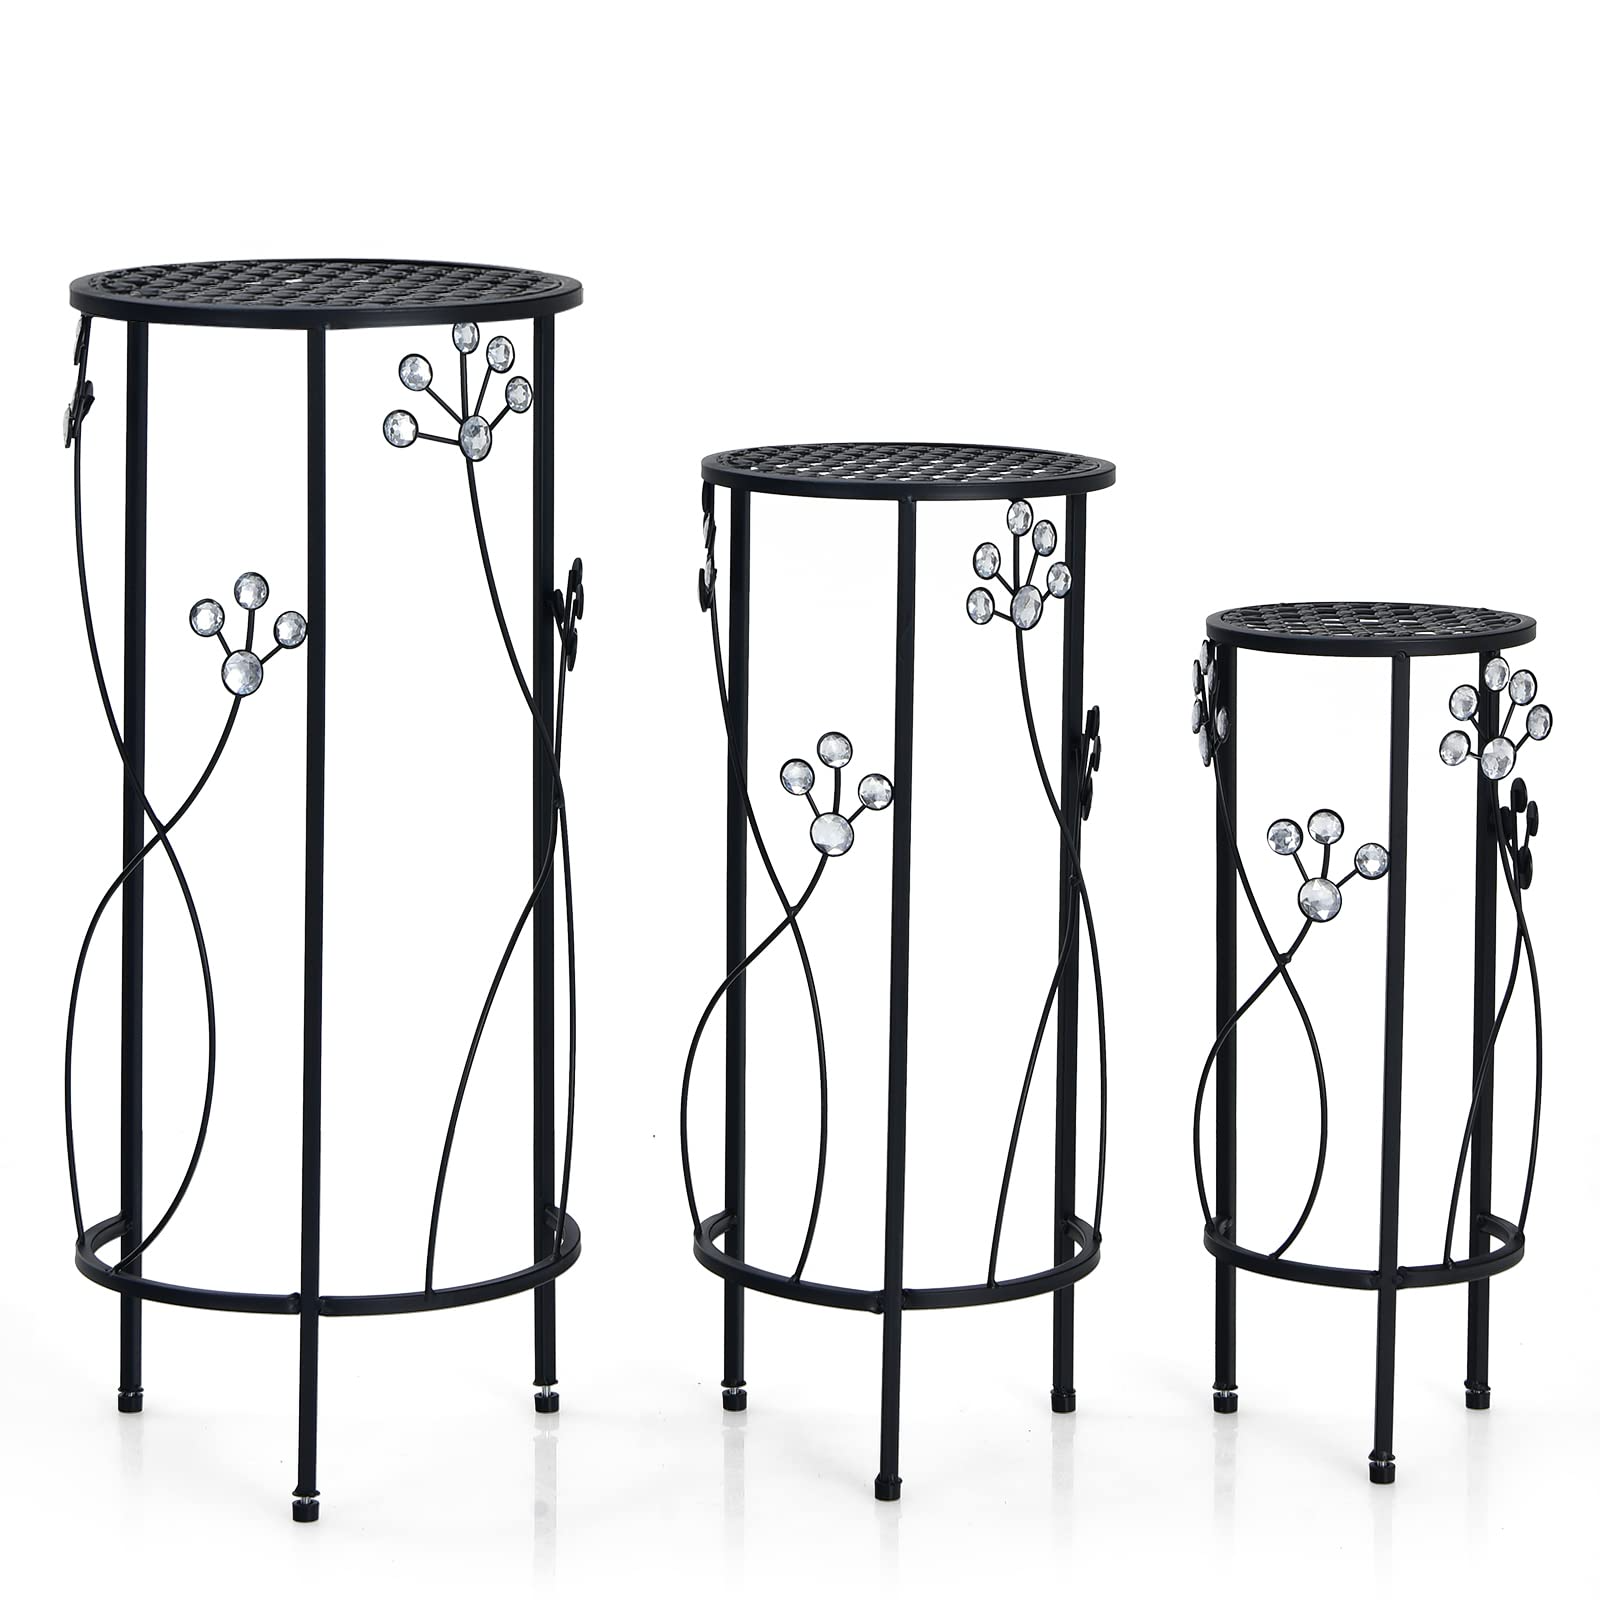 3 Pieces Flower Pots Display Rack with Vines and Crystal Floral Design